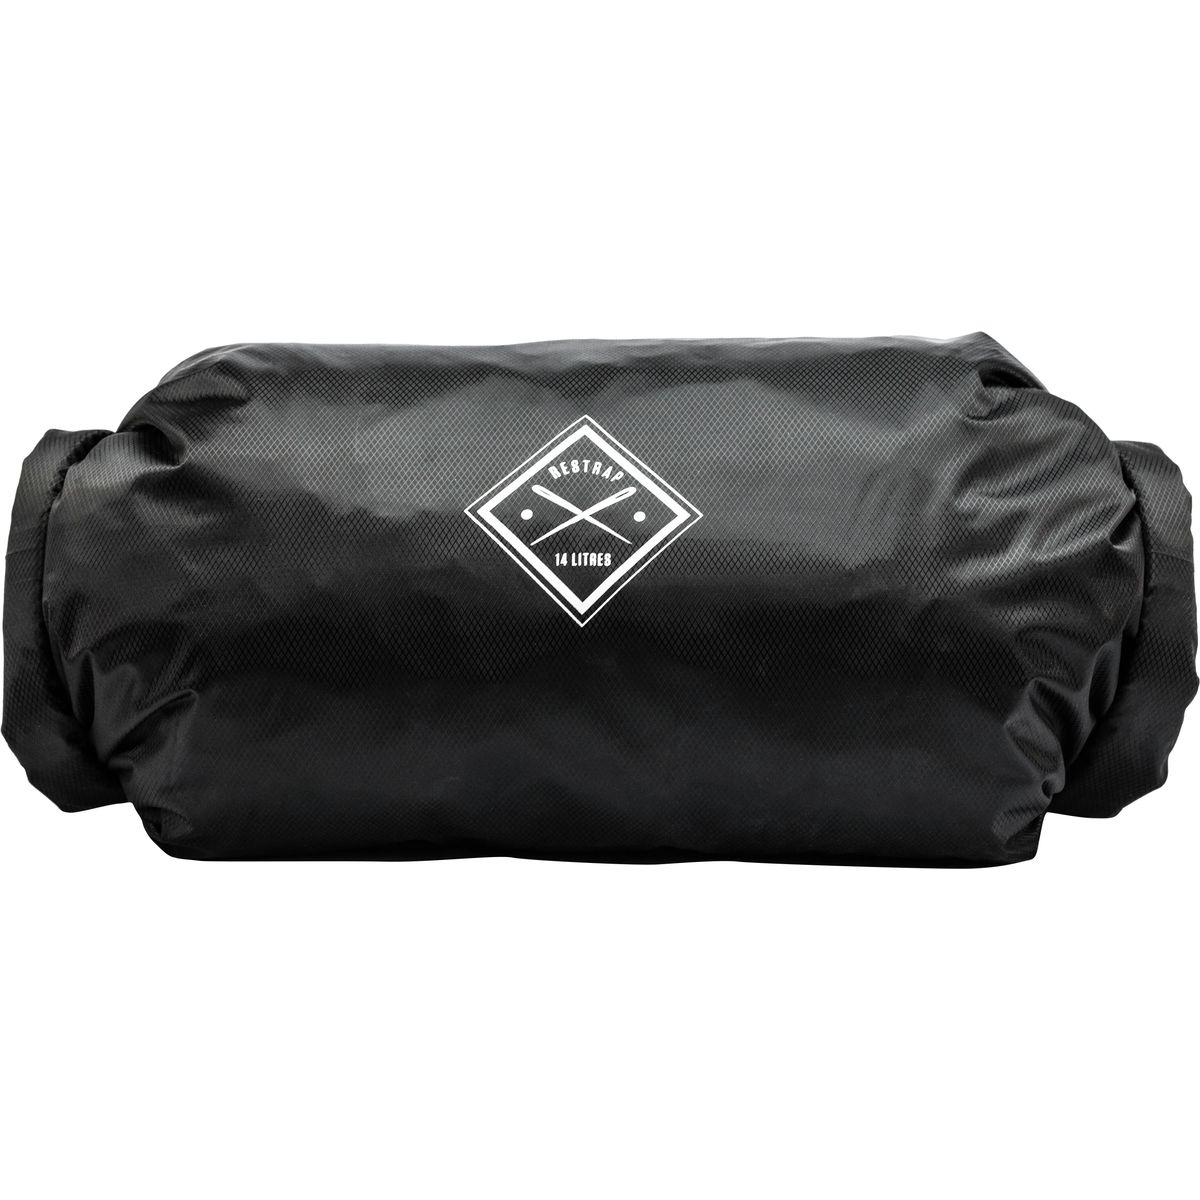 Dry Bag - Double Roll